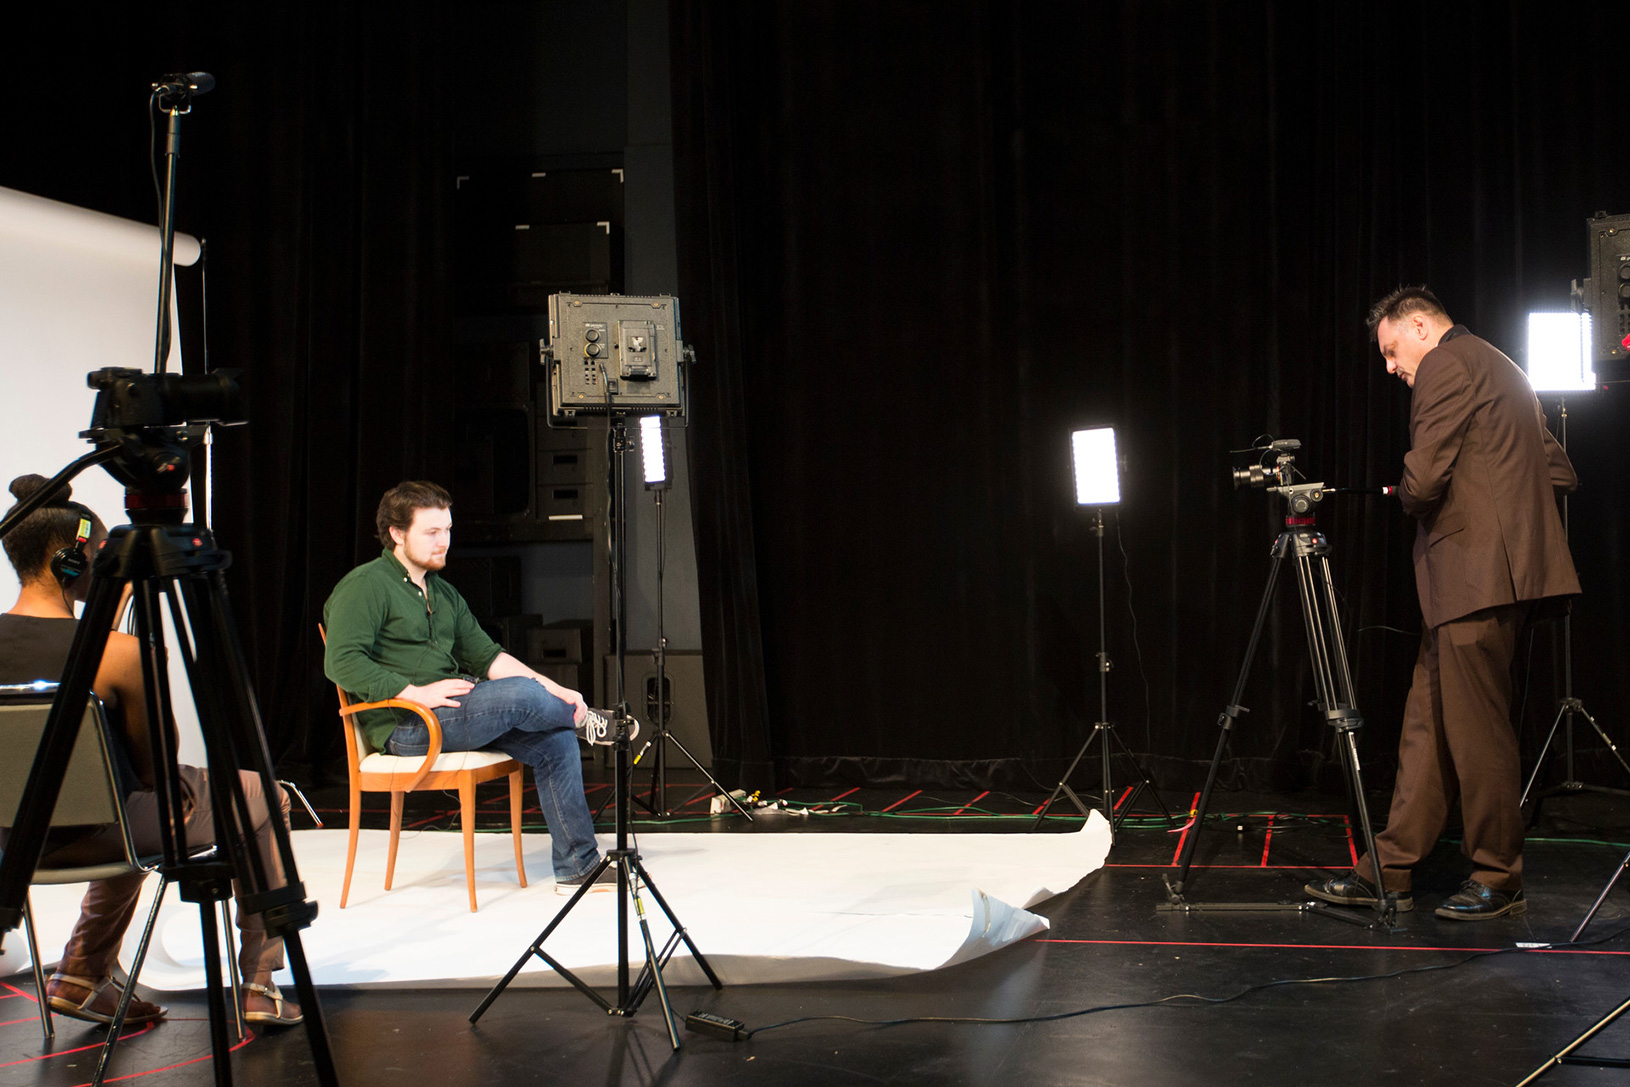 students on a video production set